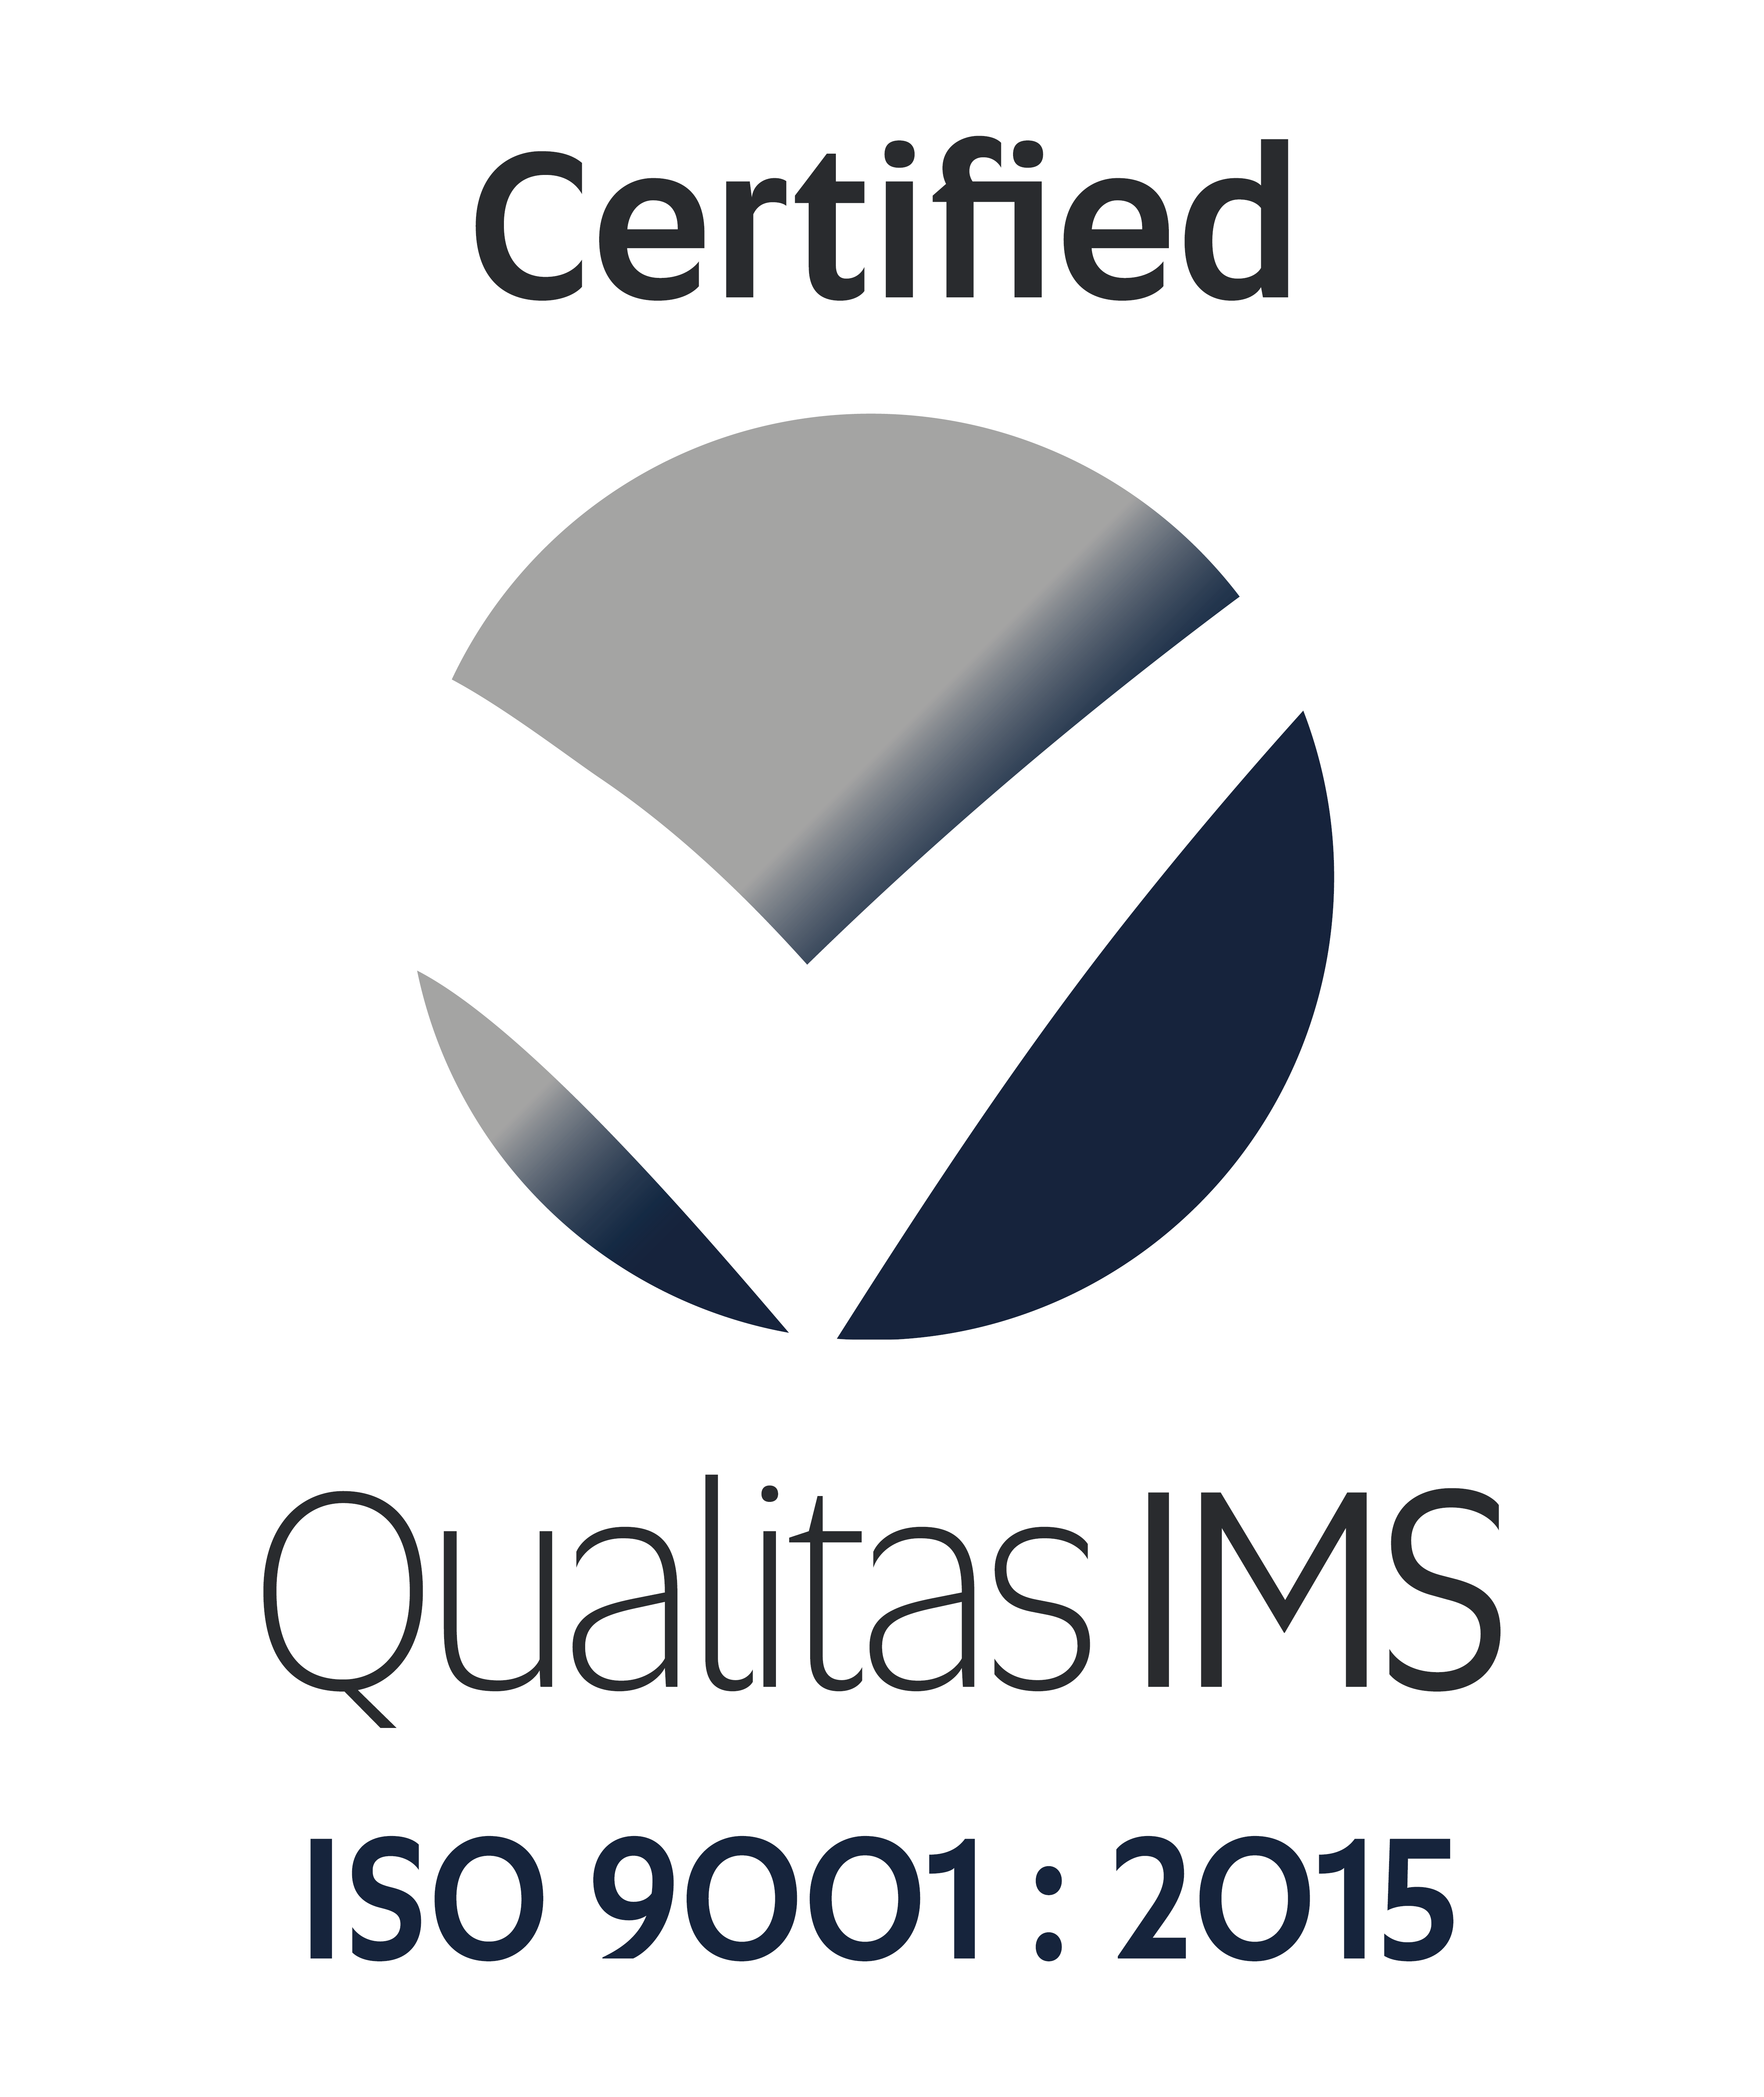 Certified Logo for ISO Accreditation with Qualitas IMS ISO 9001: 2015